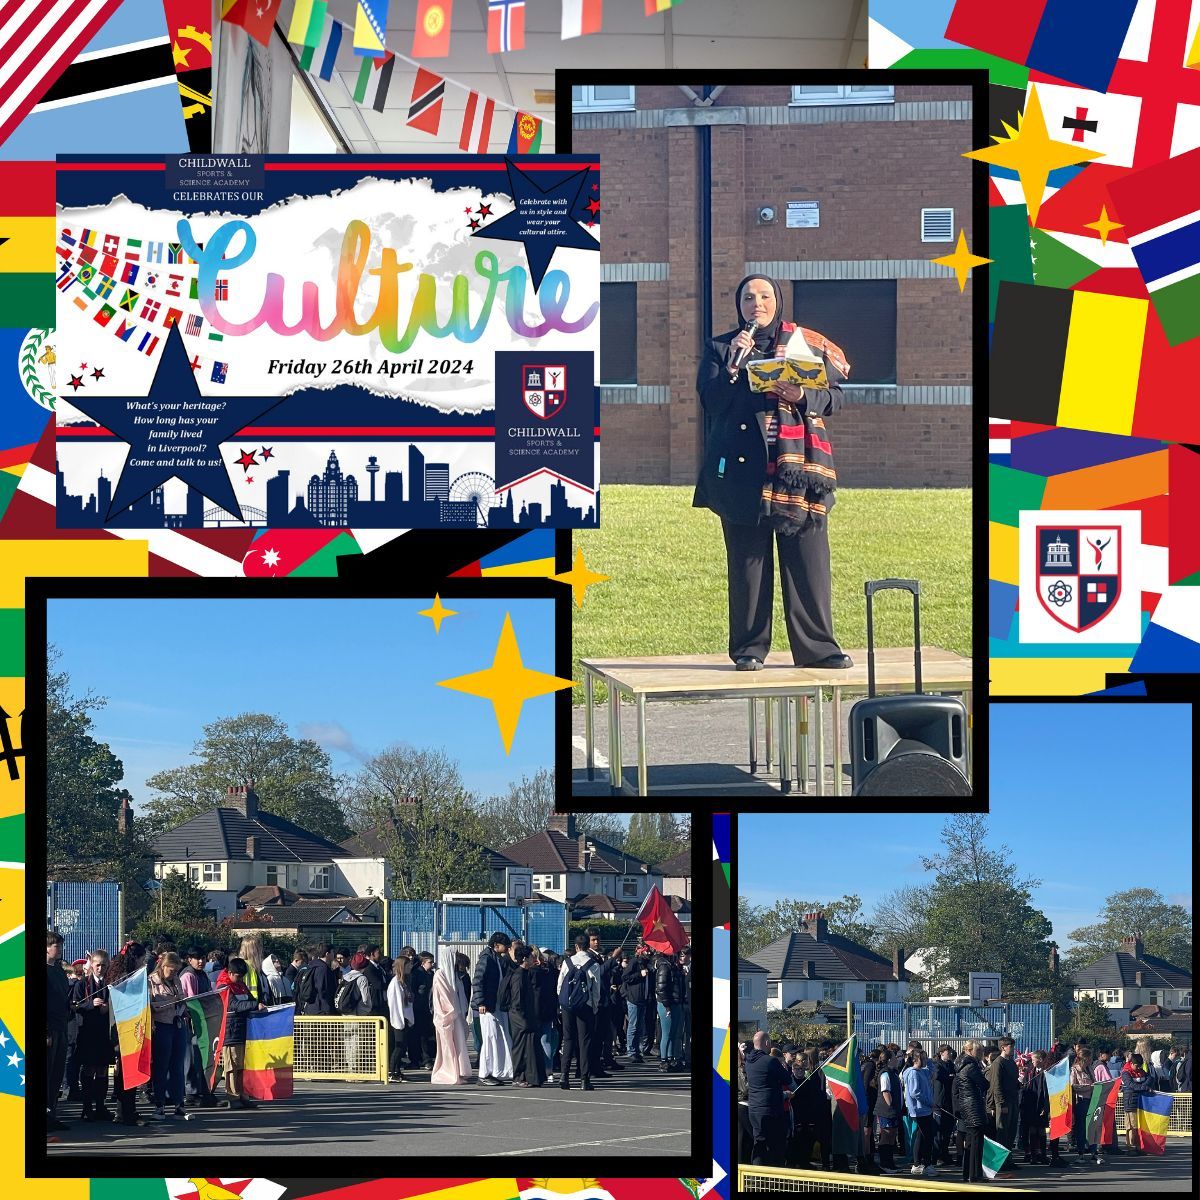 Childwall Celebrates Our Culture Day is well under way. Thank you to Amina for her truly inspirational speech. What an incredible way to start such a special day. Wave those flags high. #This is Childwall! 🌎